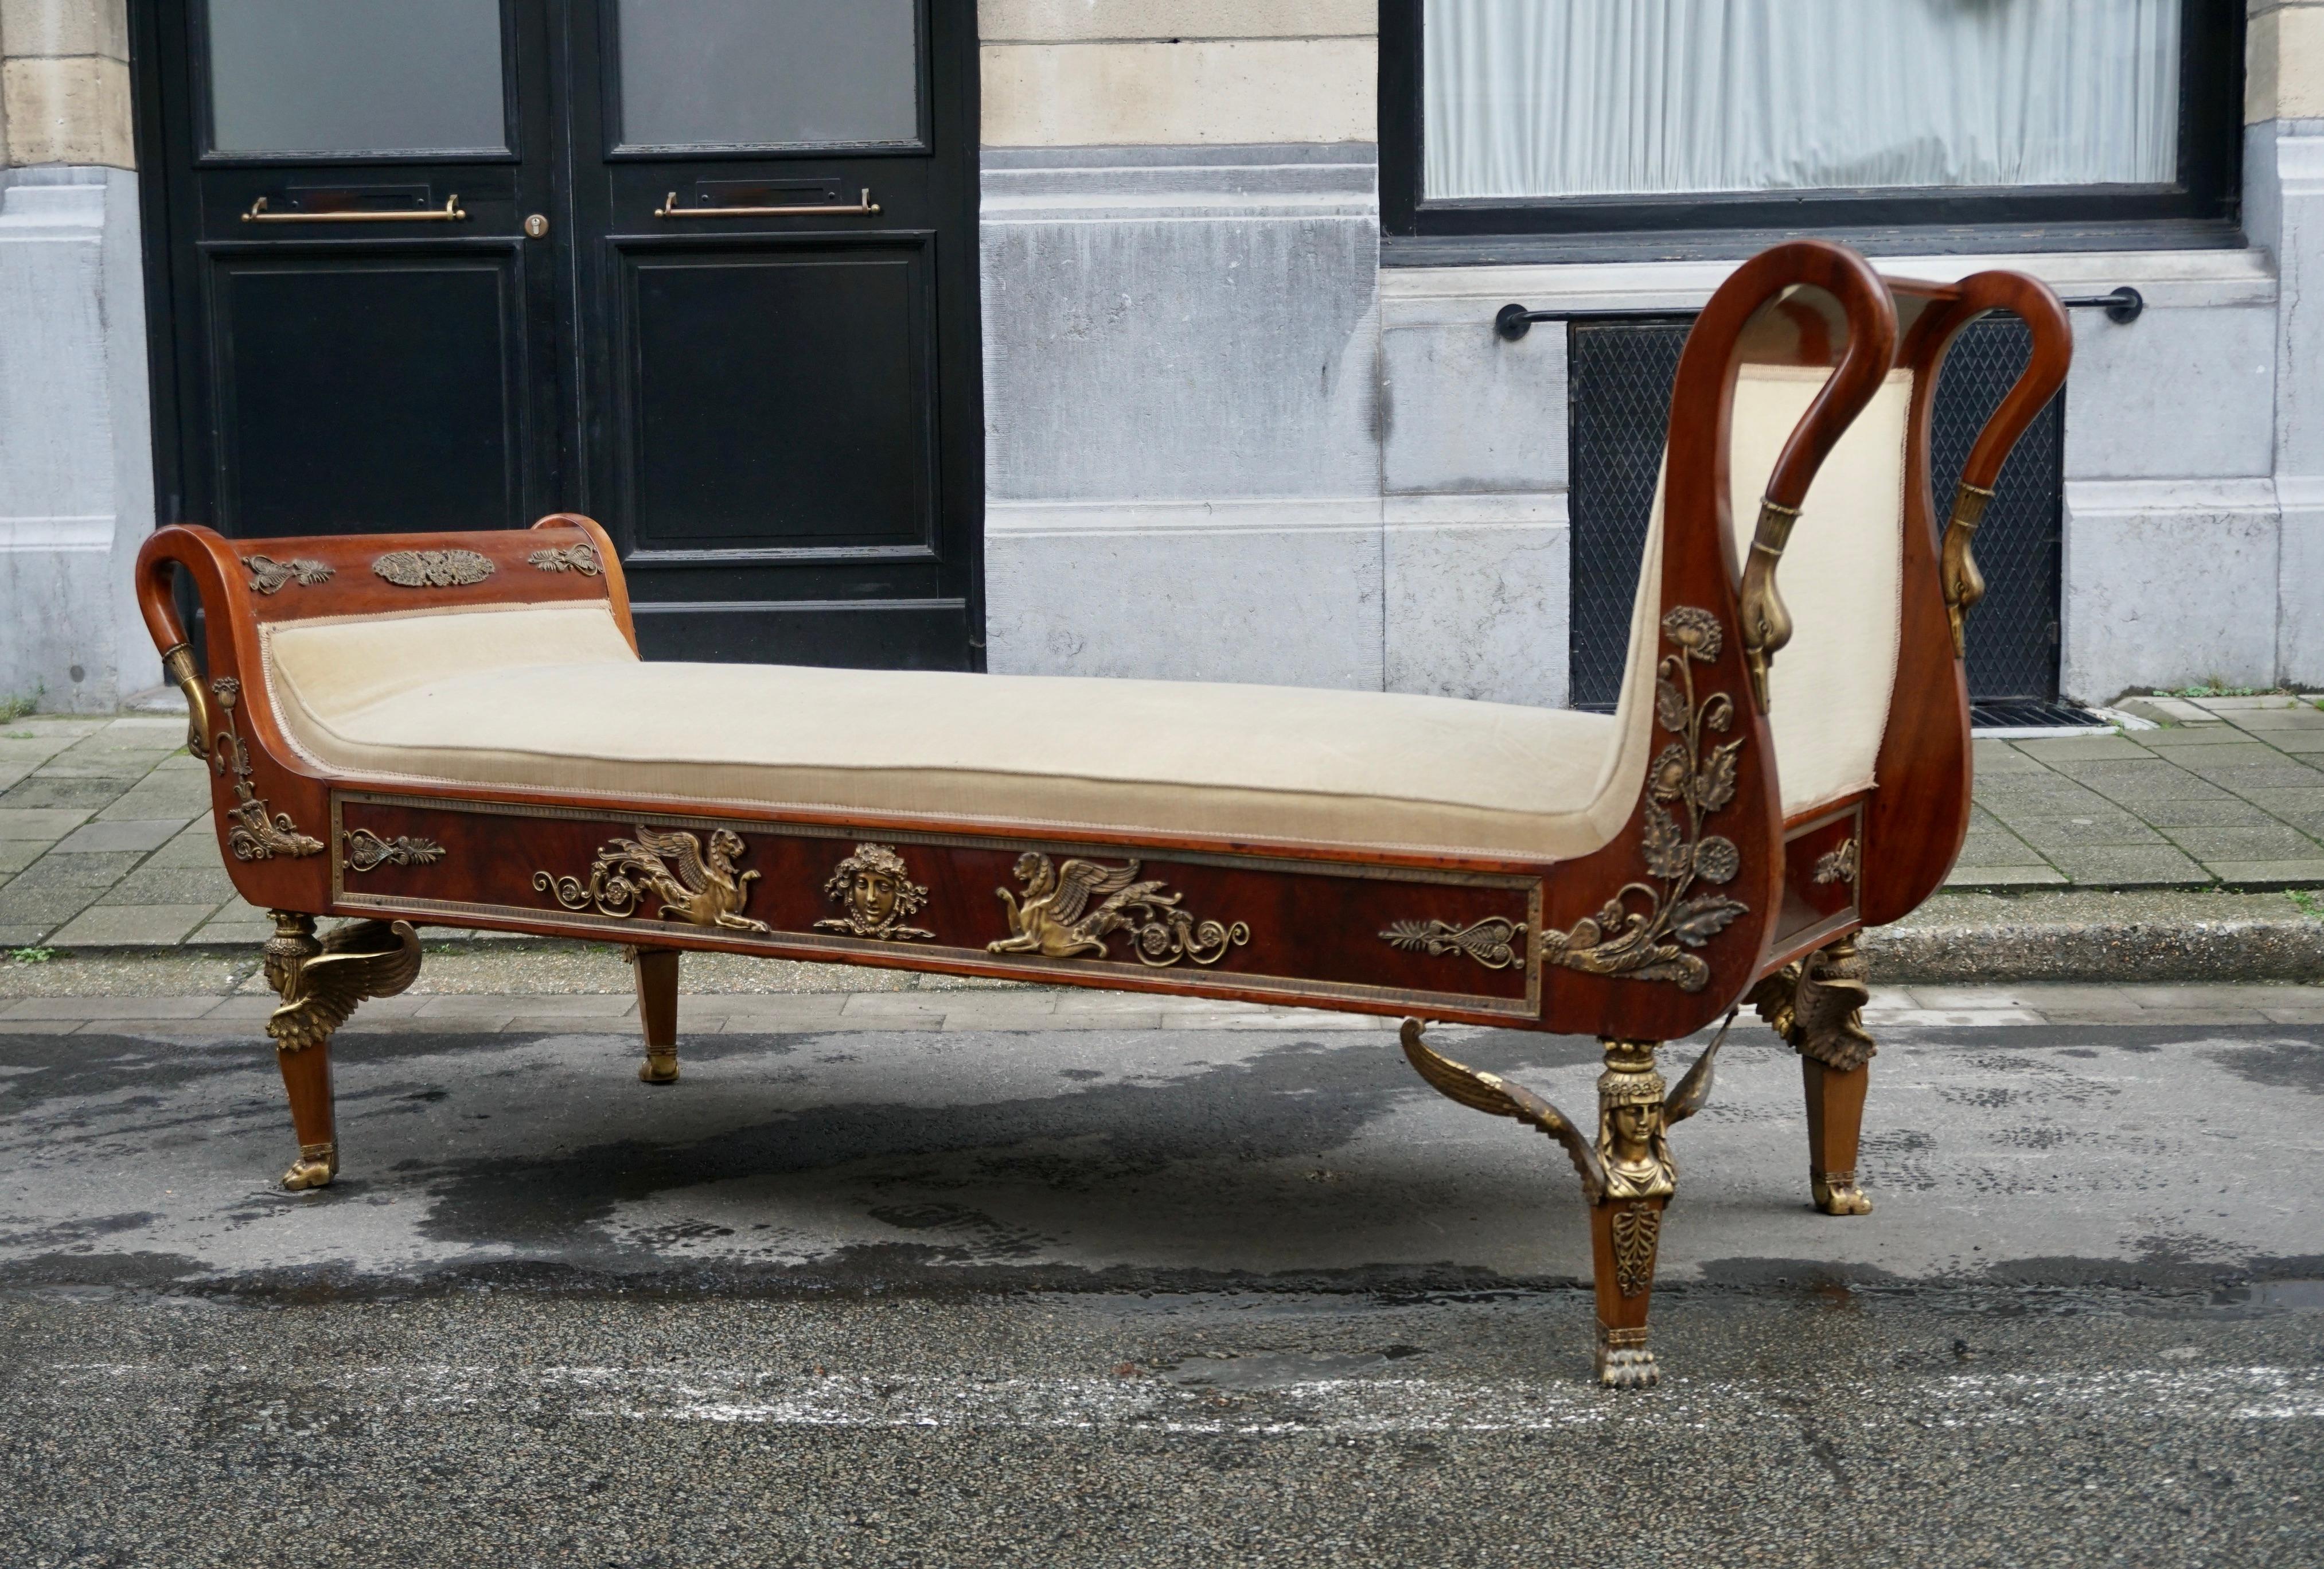 Incredible Gilt Bronze-Mounted Swan Neck Daybed in French Empire Style For Sale 2